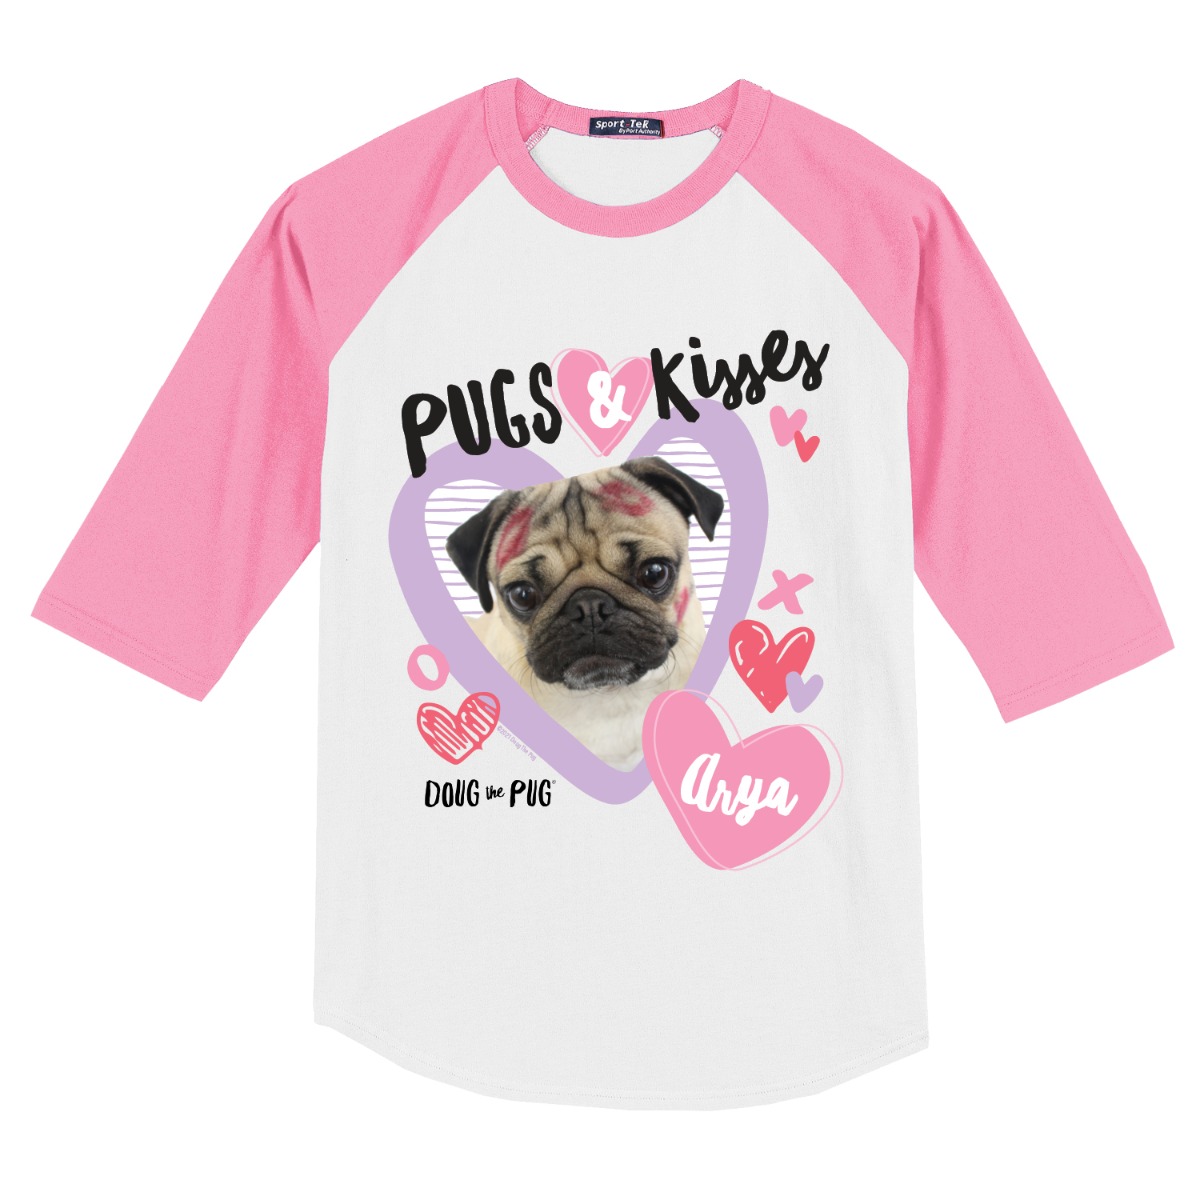 Doug The Pug Personalized Pugs & Kisses Youth Sports Jersey